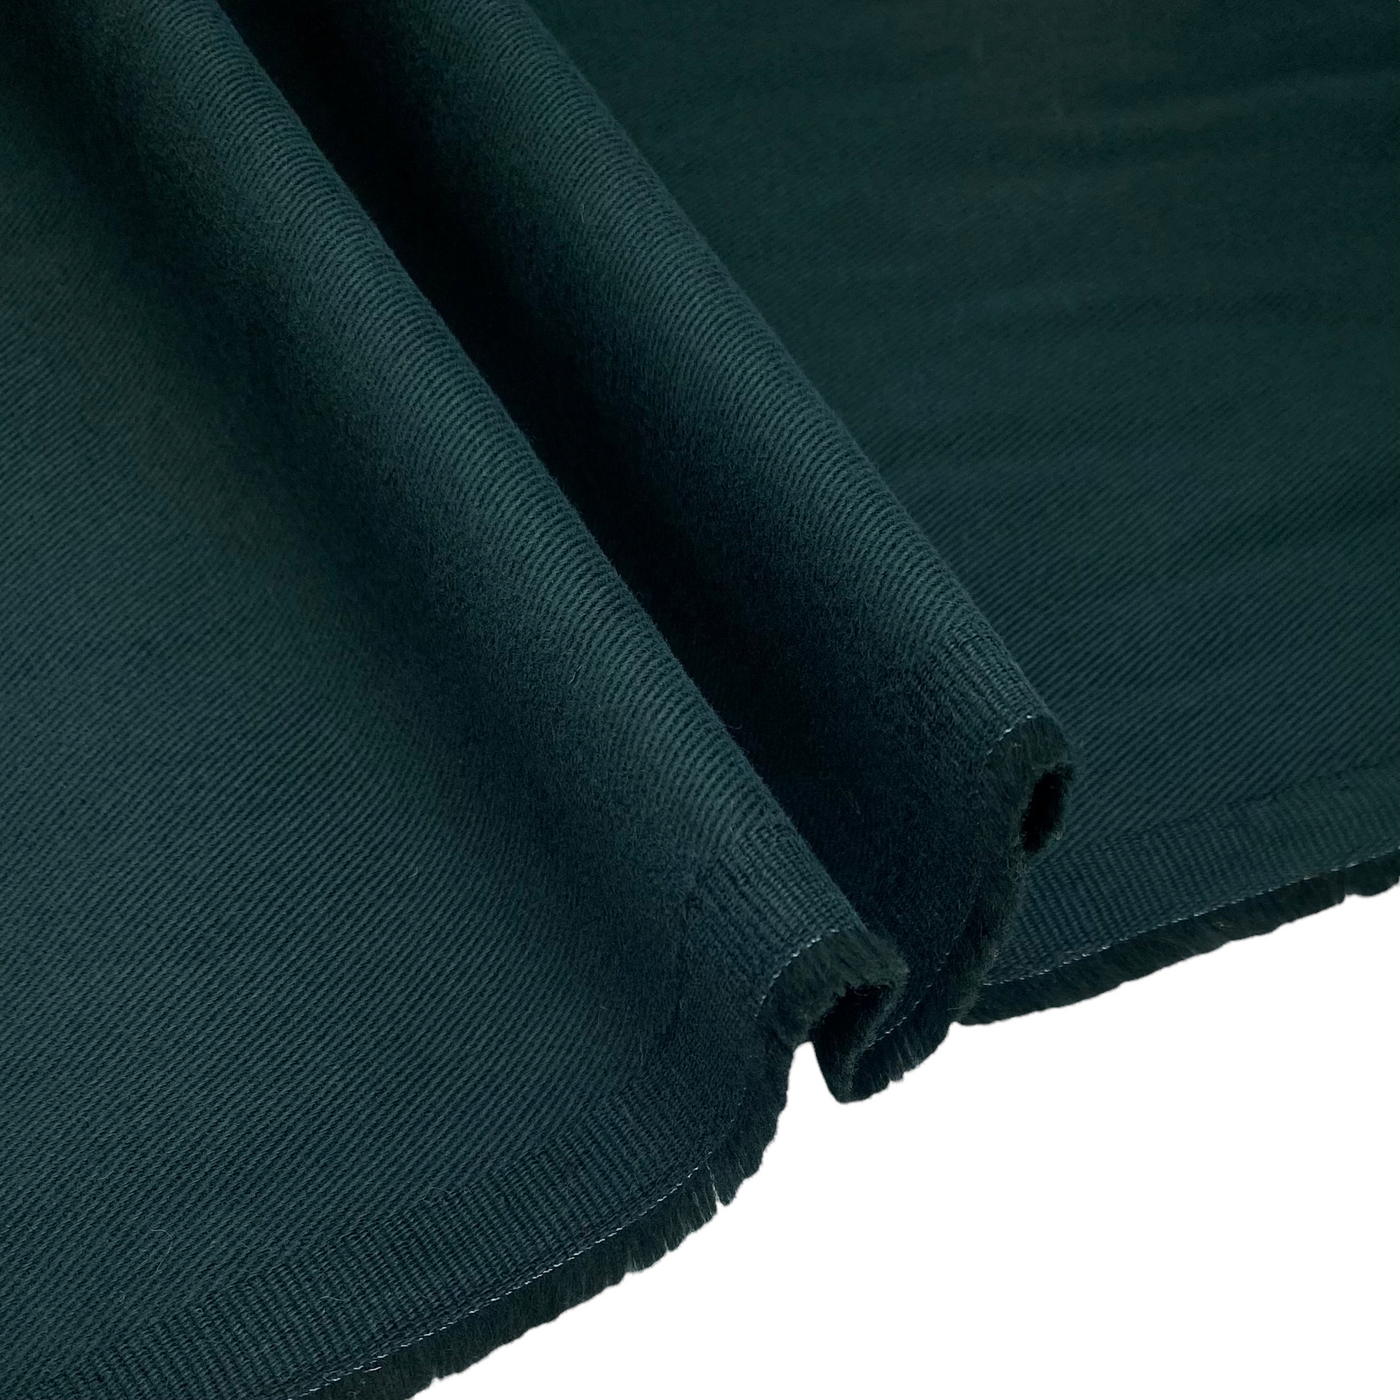 Twill Brushed Cotton Canvas - 6oz - 66” - Green